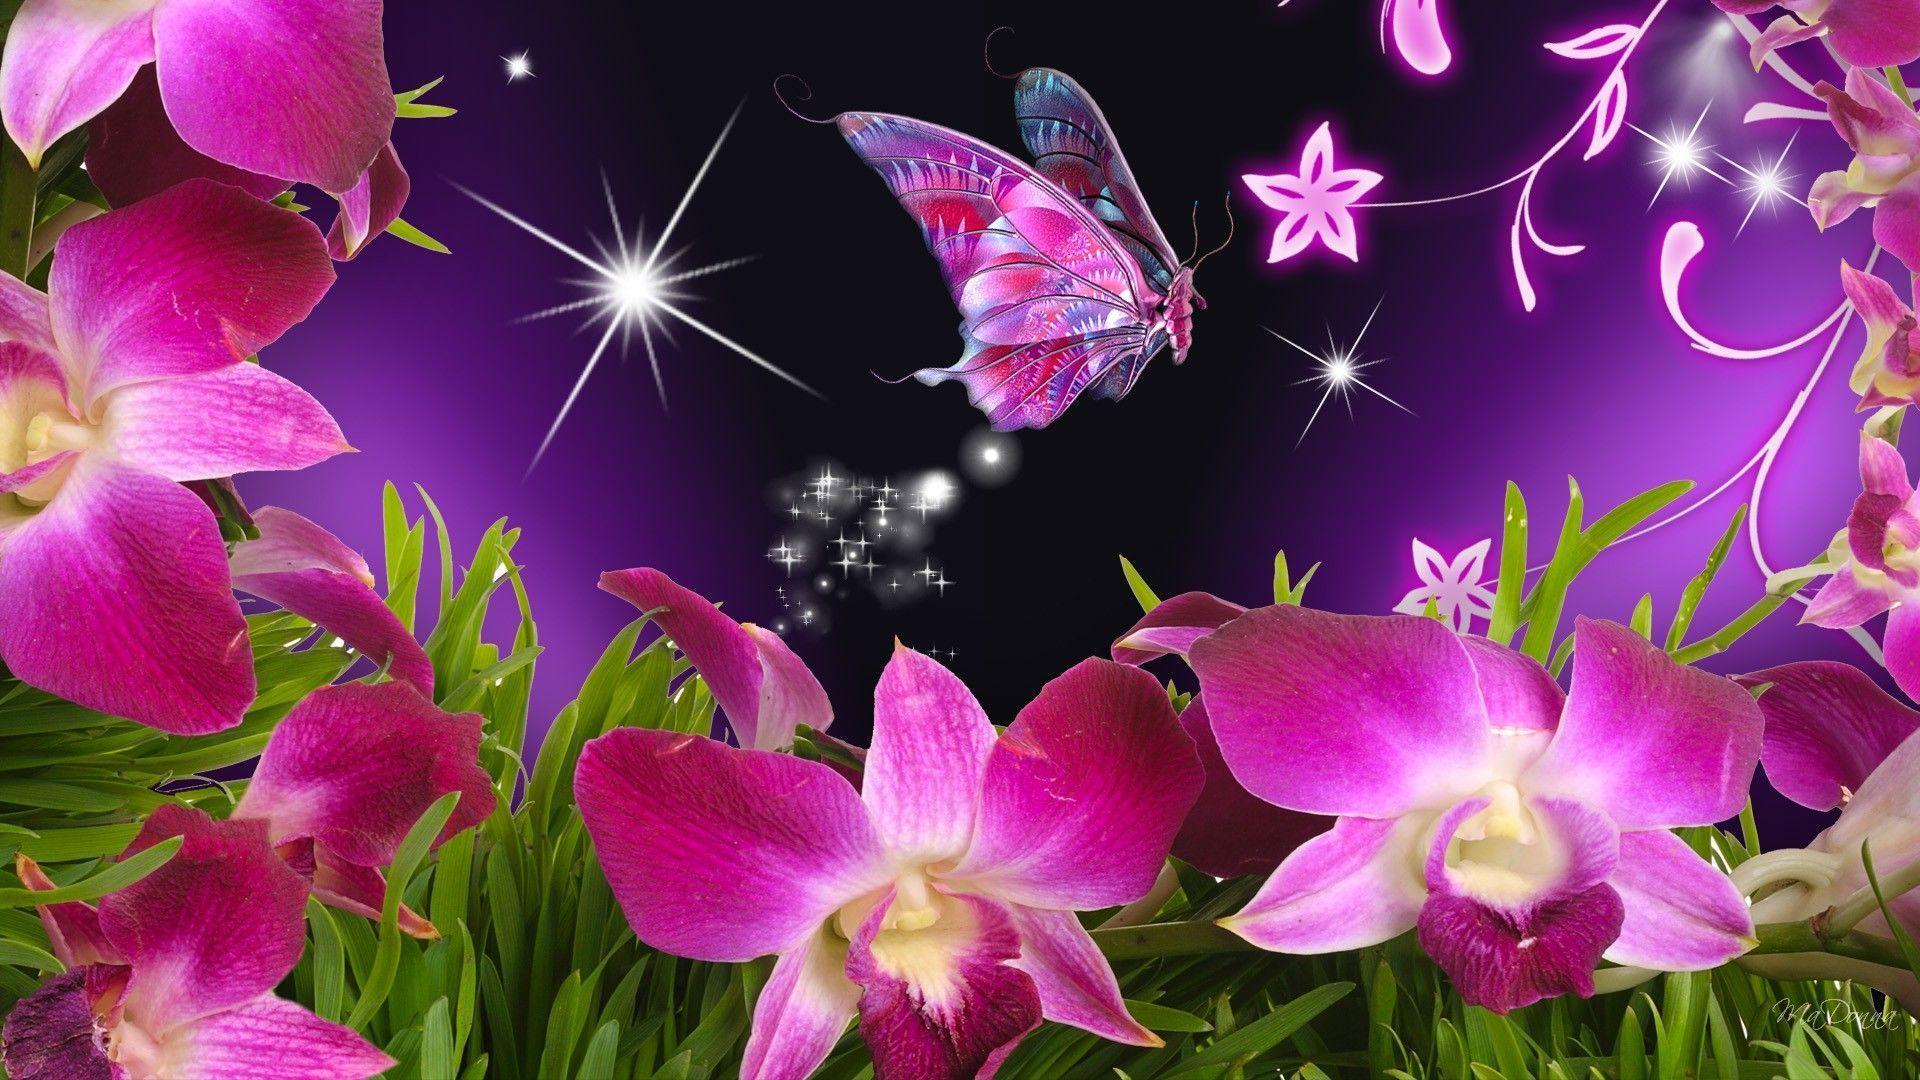 Butterfly And Flower Wallpapers Wallpaper Cave